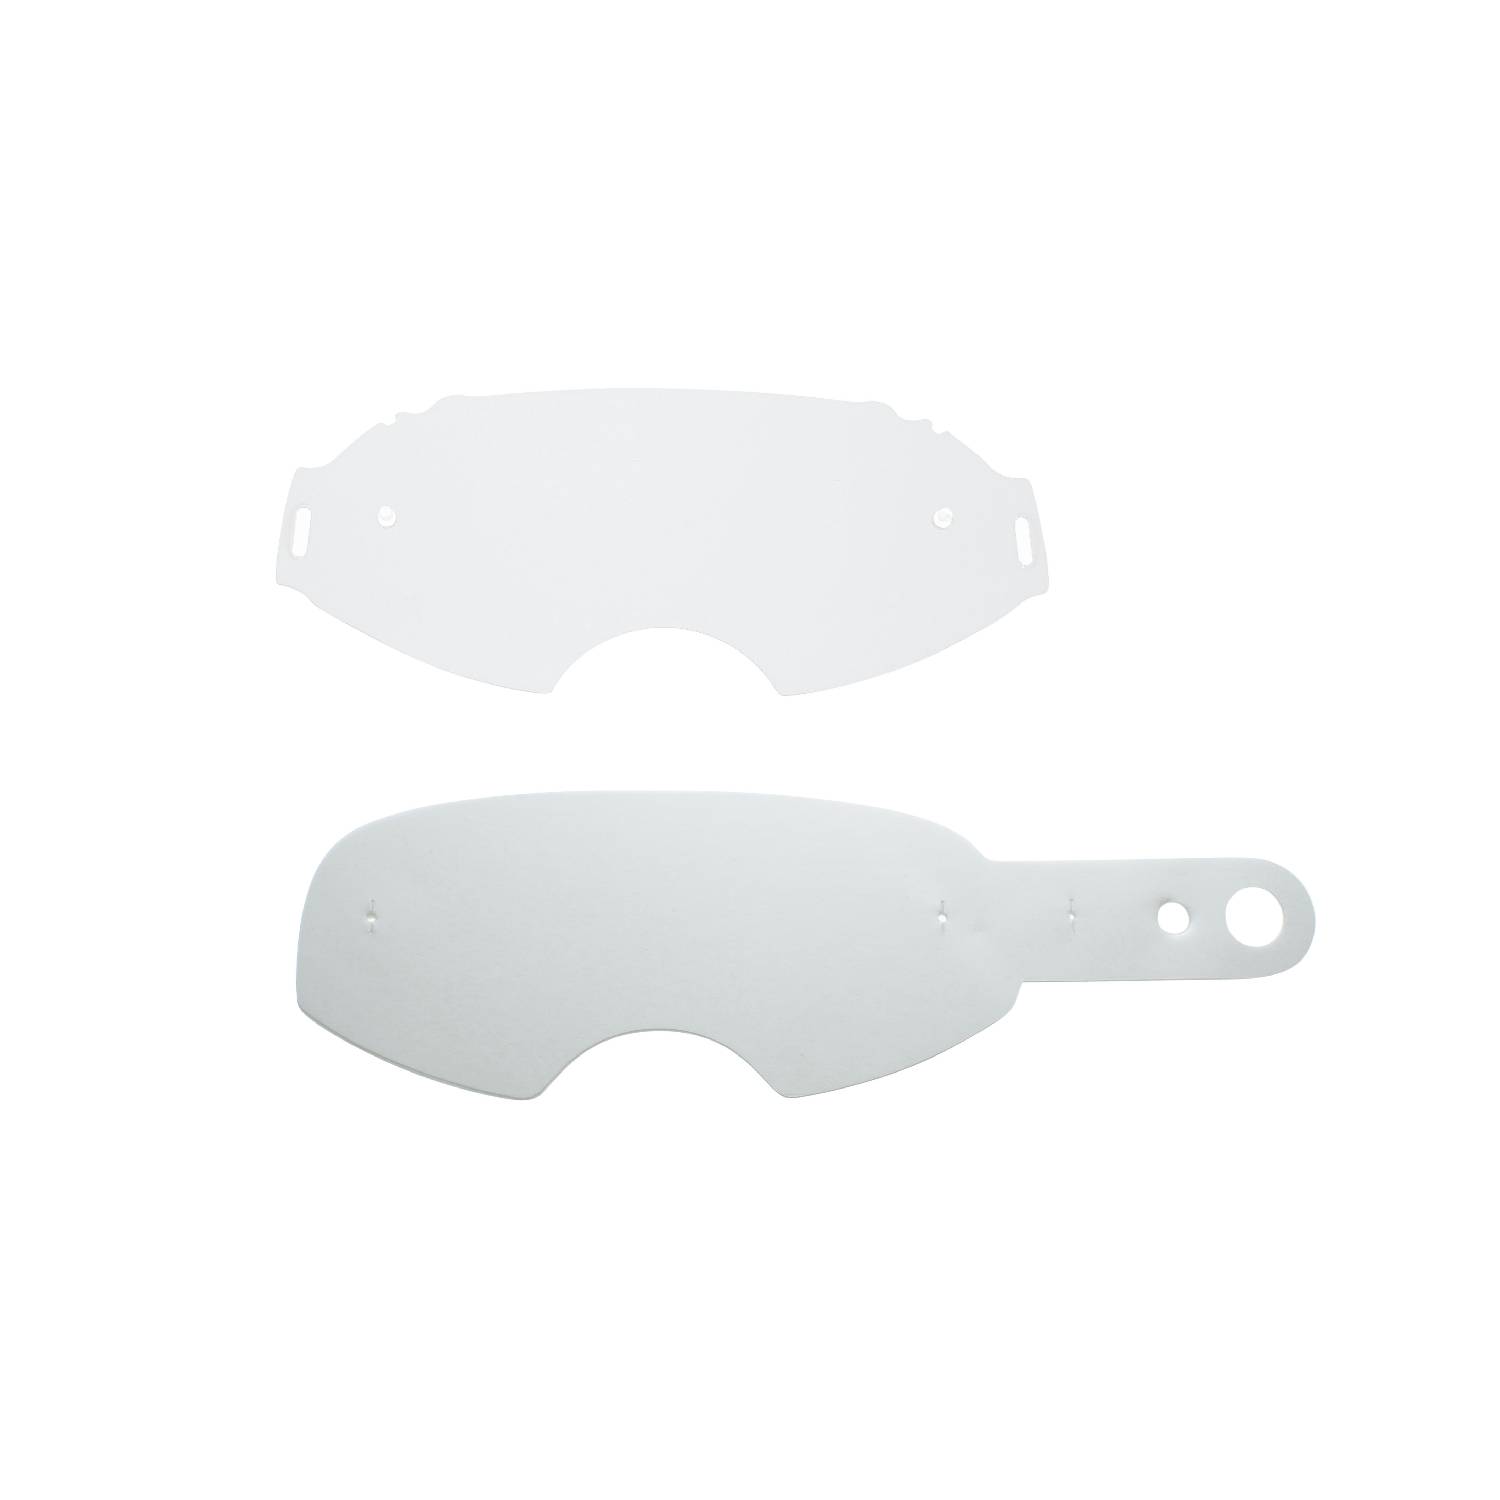 Clear lens + 10 Tear-OFFS (combo) compatible for Oakley Airbrake Flat goggle